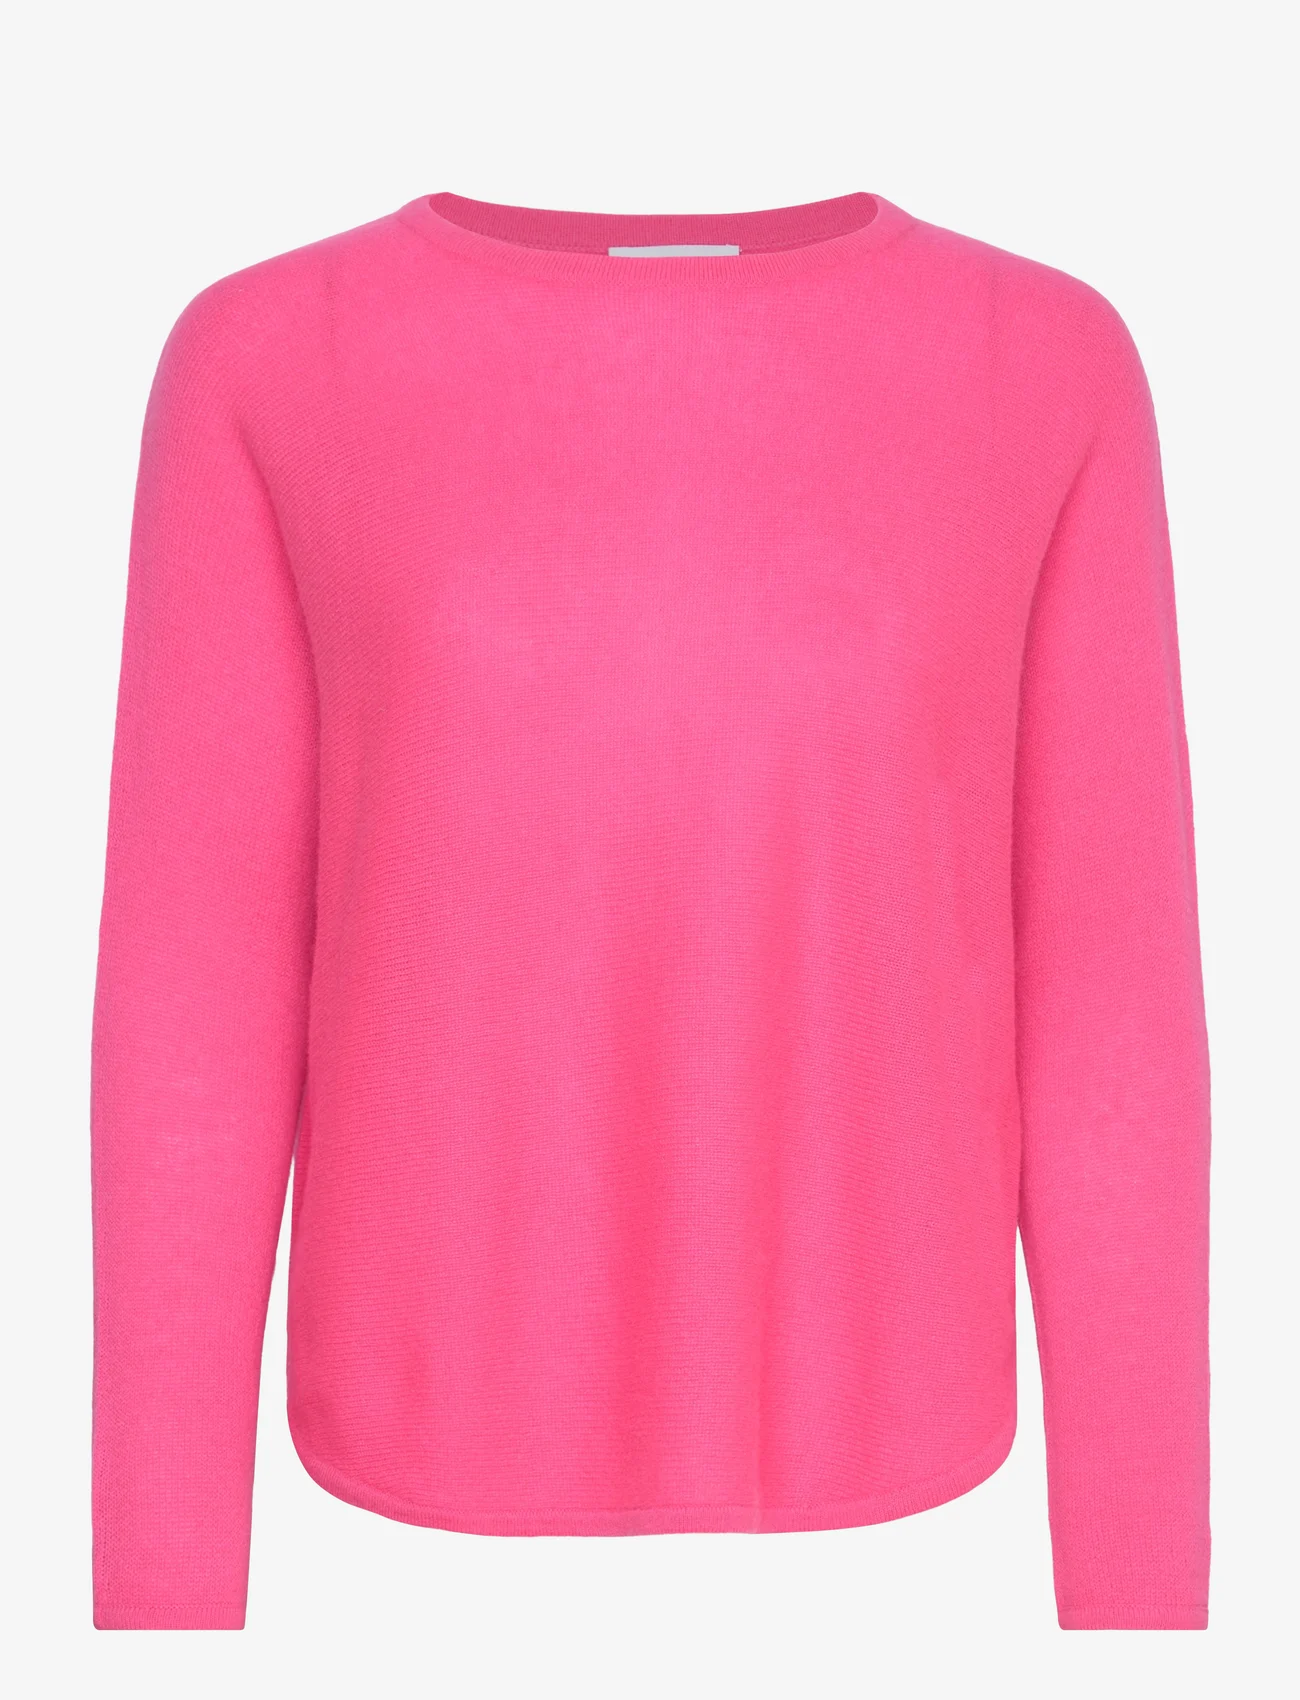 Davida Cashmere - Curved Sweater Loose Tension - swetry - candy pink - 0